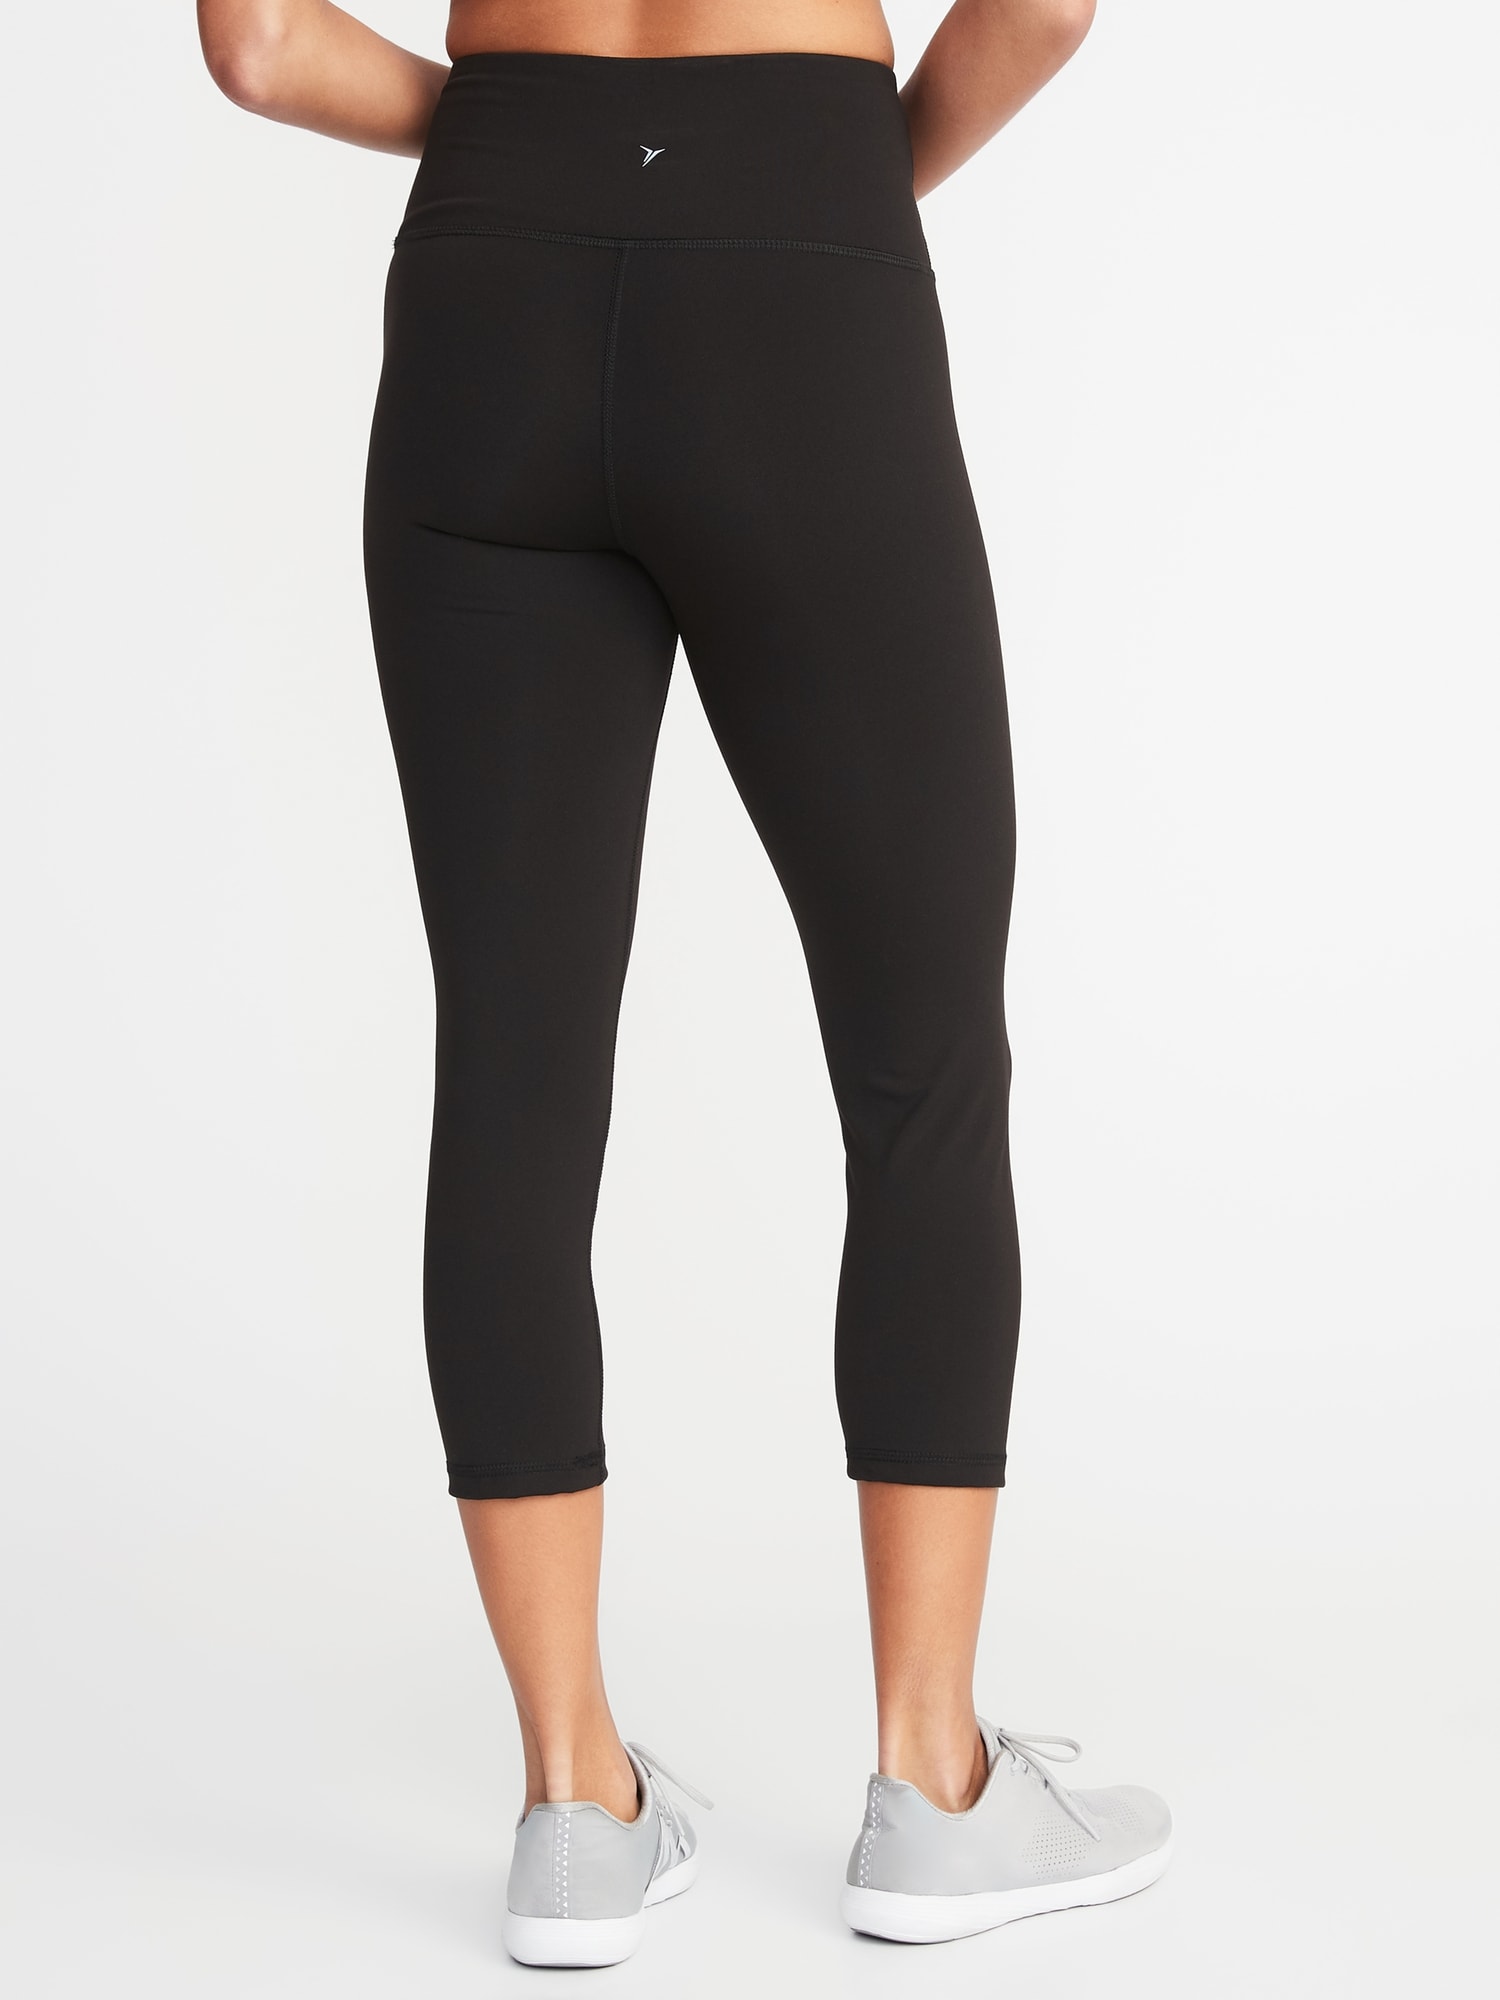 old navy yoga pants with pockets